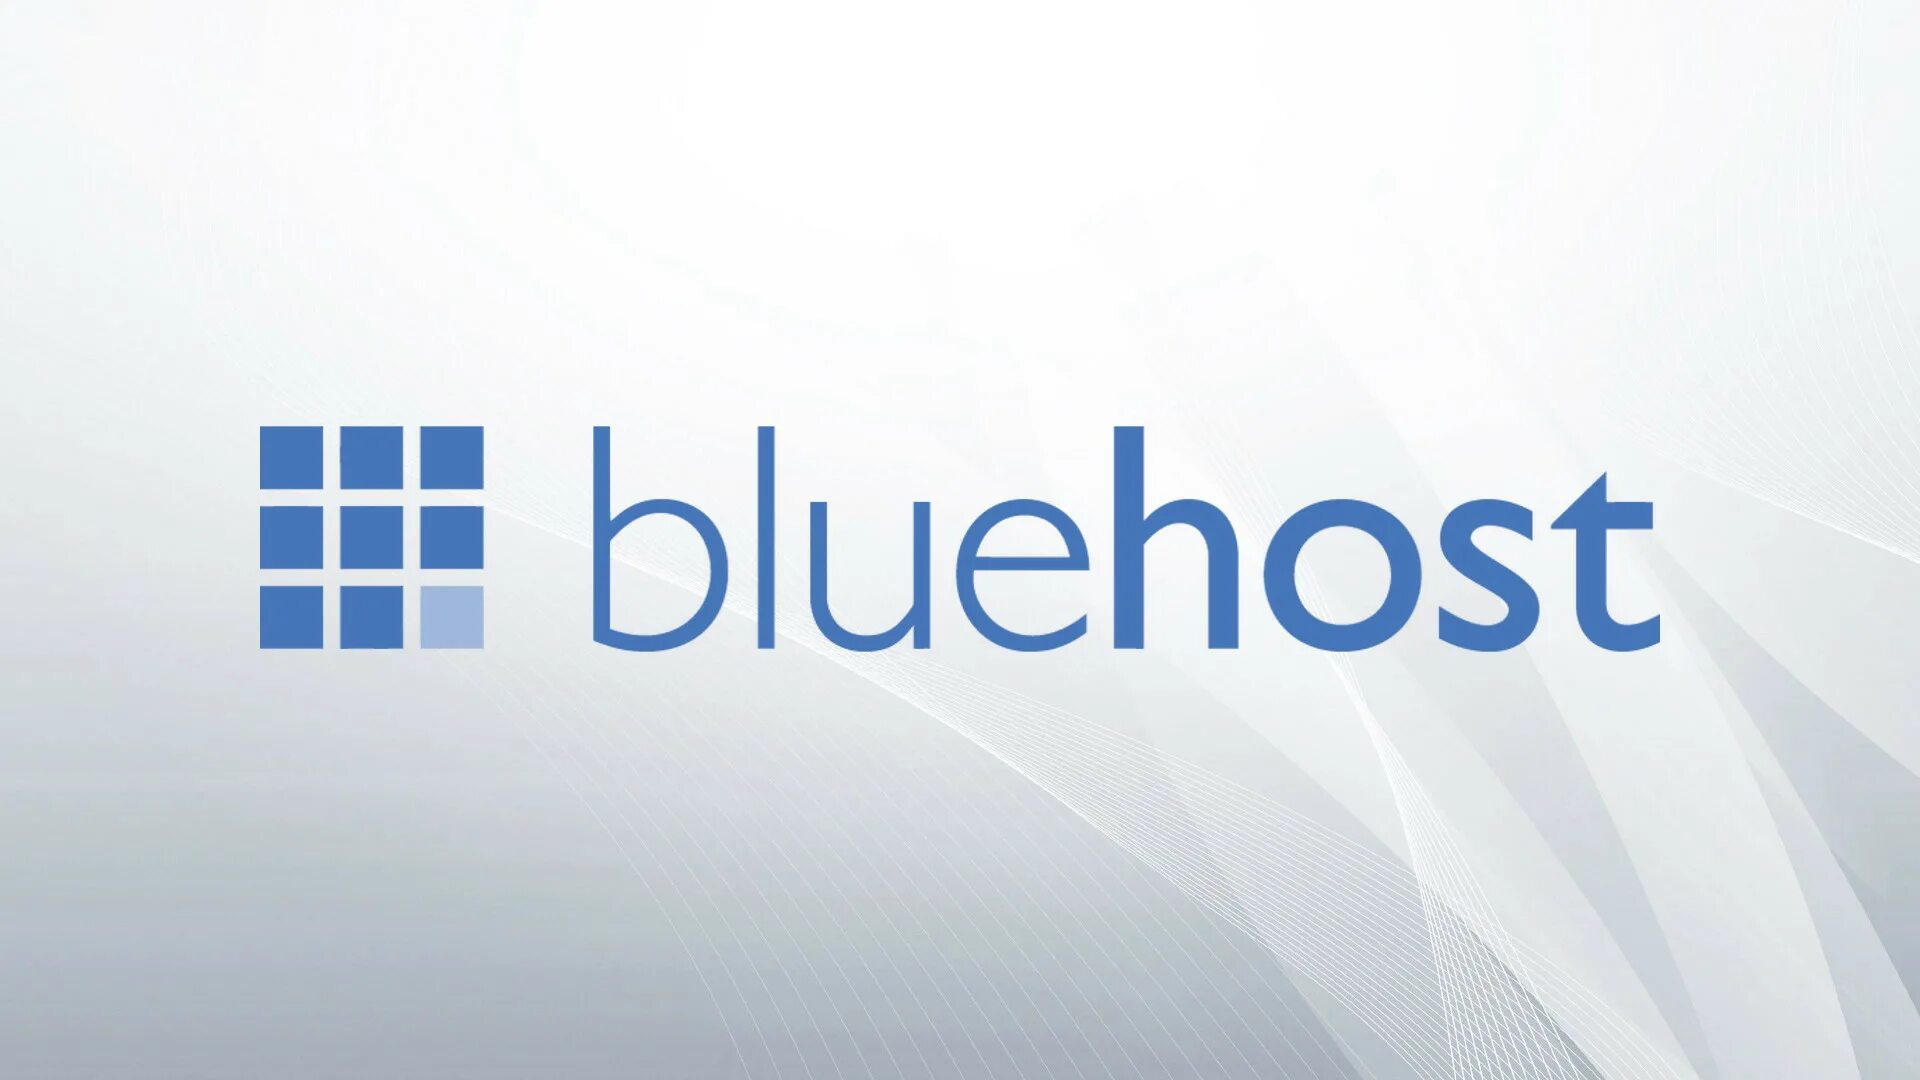 Bluehost. Have Blue. Bluehost logo. "Bluehost Inc"+Минск. Well hosting